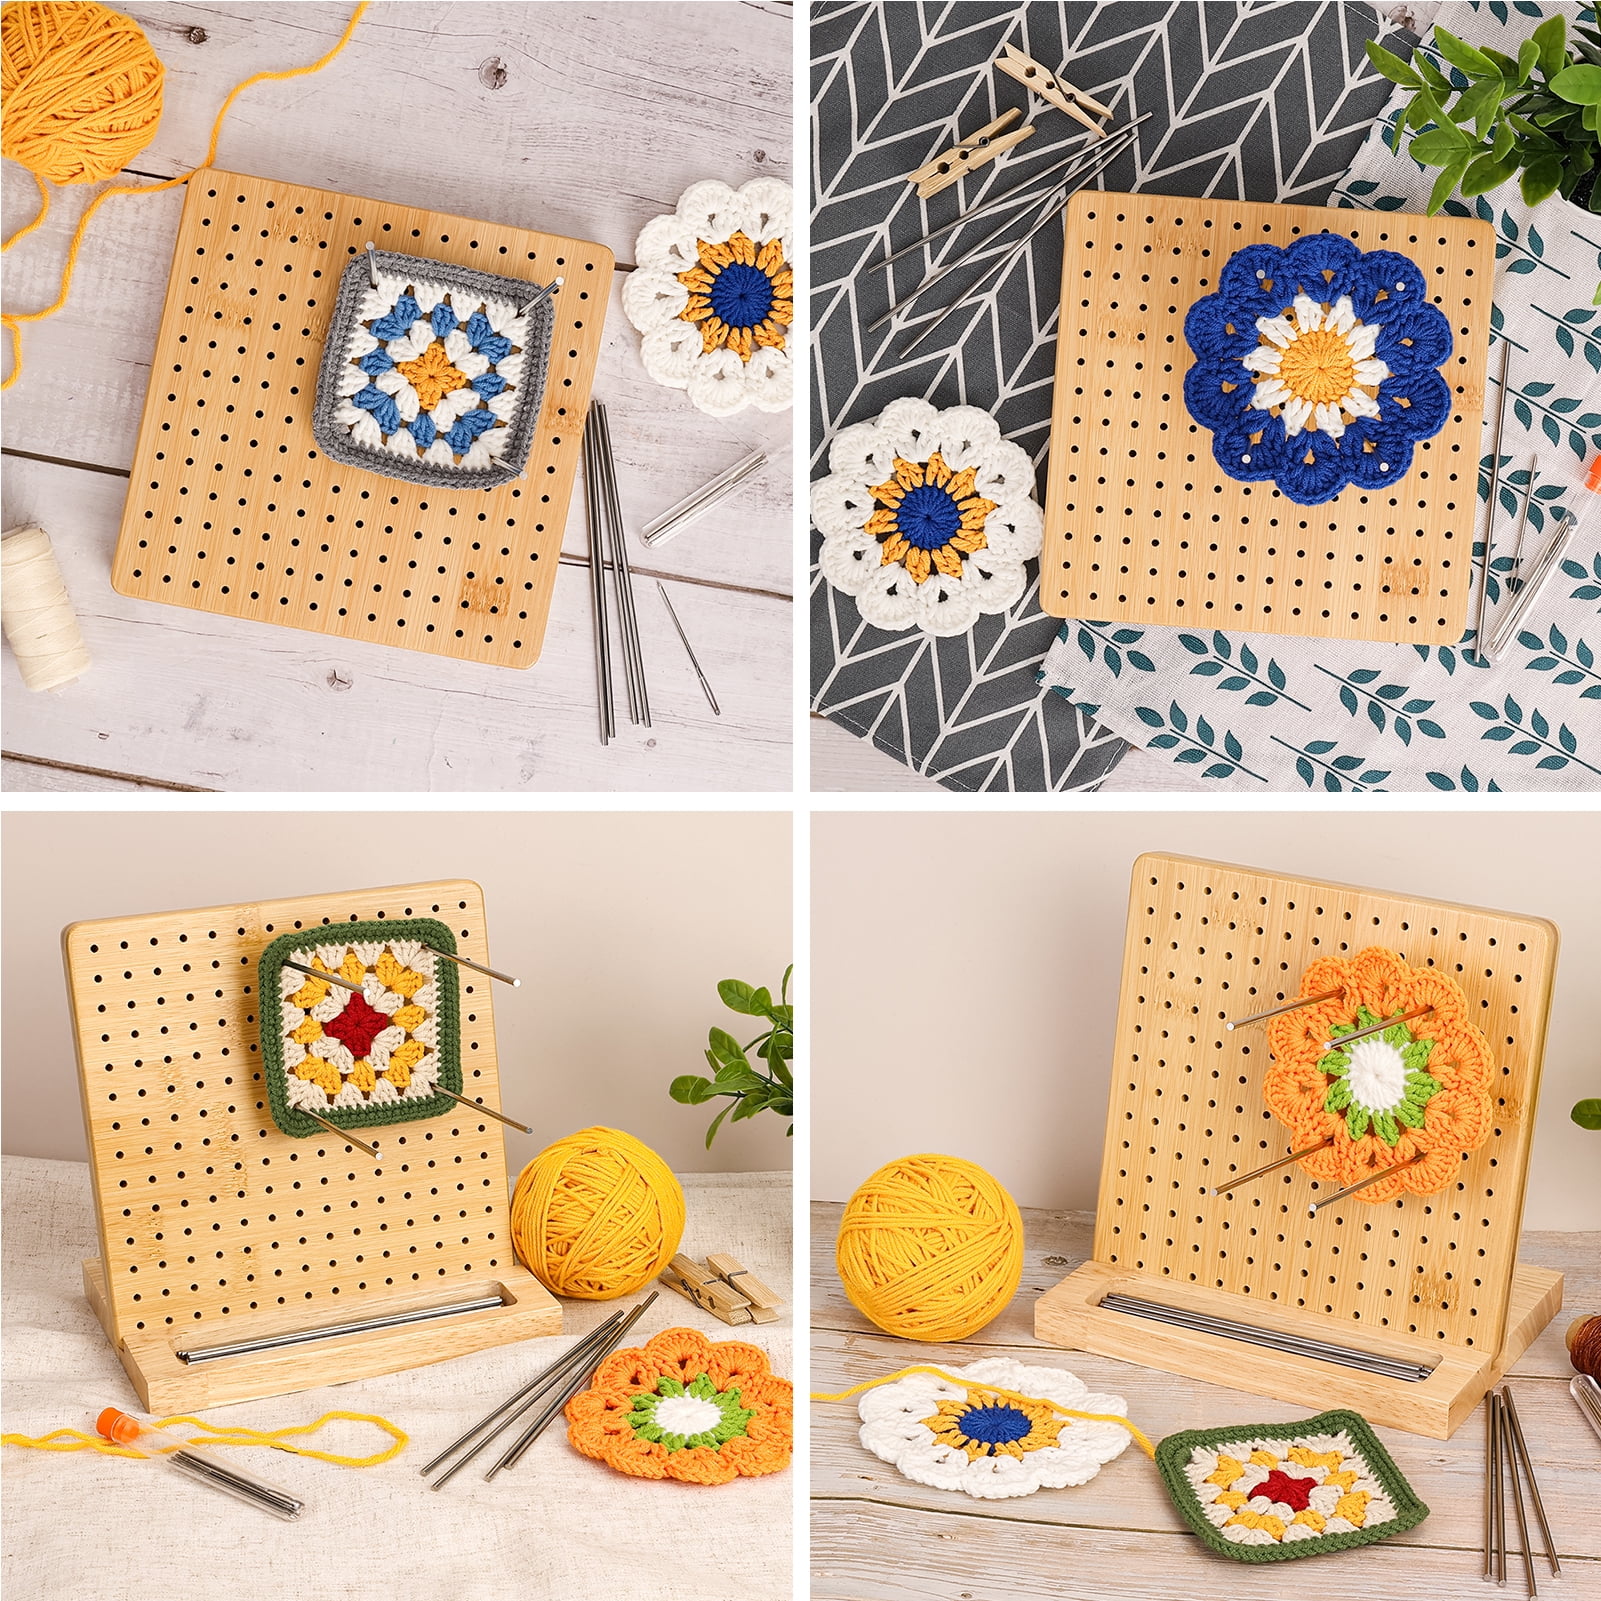 Bamboo Crochet Blocking Board Small, Granny Square Blocking Board with 24  Pcs Steel Pins for Knitting Crochet, Blocking Board for Crocheting Ideal